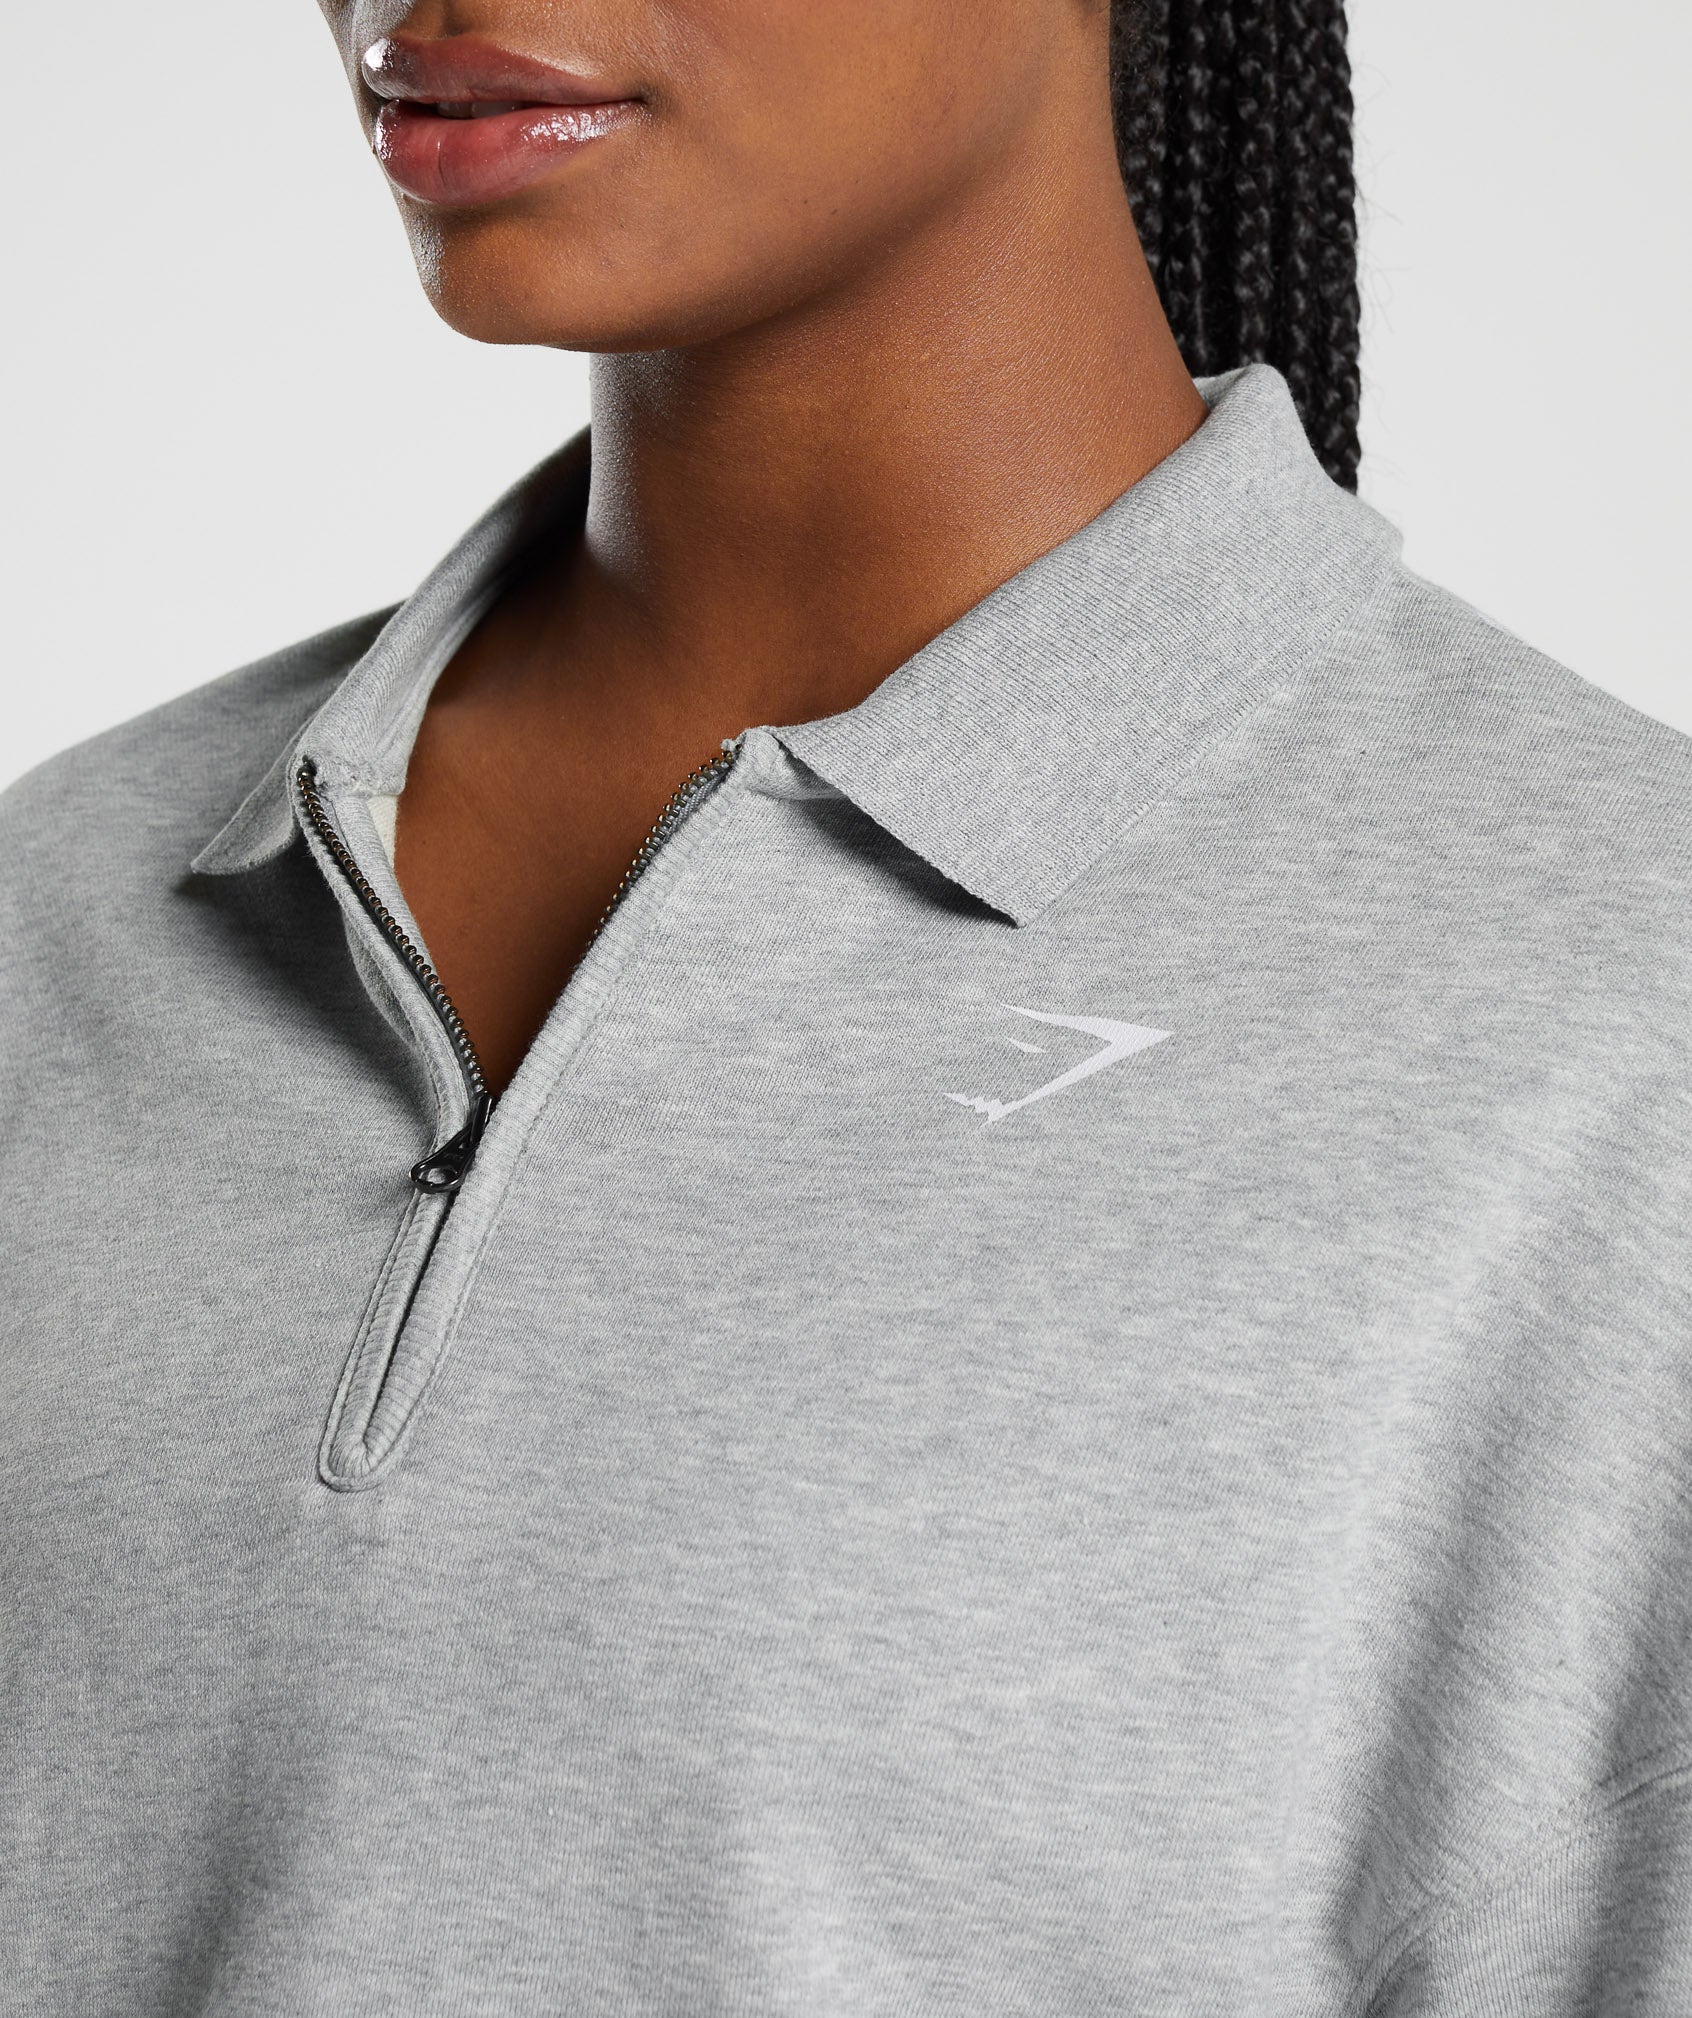 Phys Ed Graphic 1/4 Zip in Light Grey Core Marl - view 6